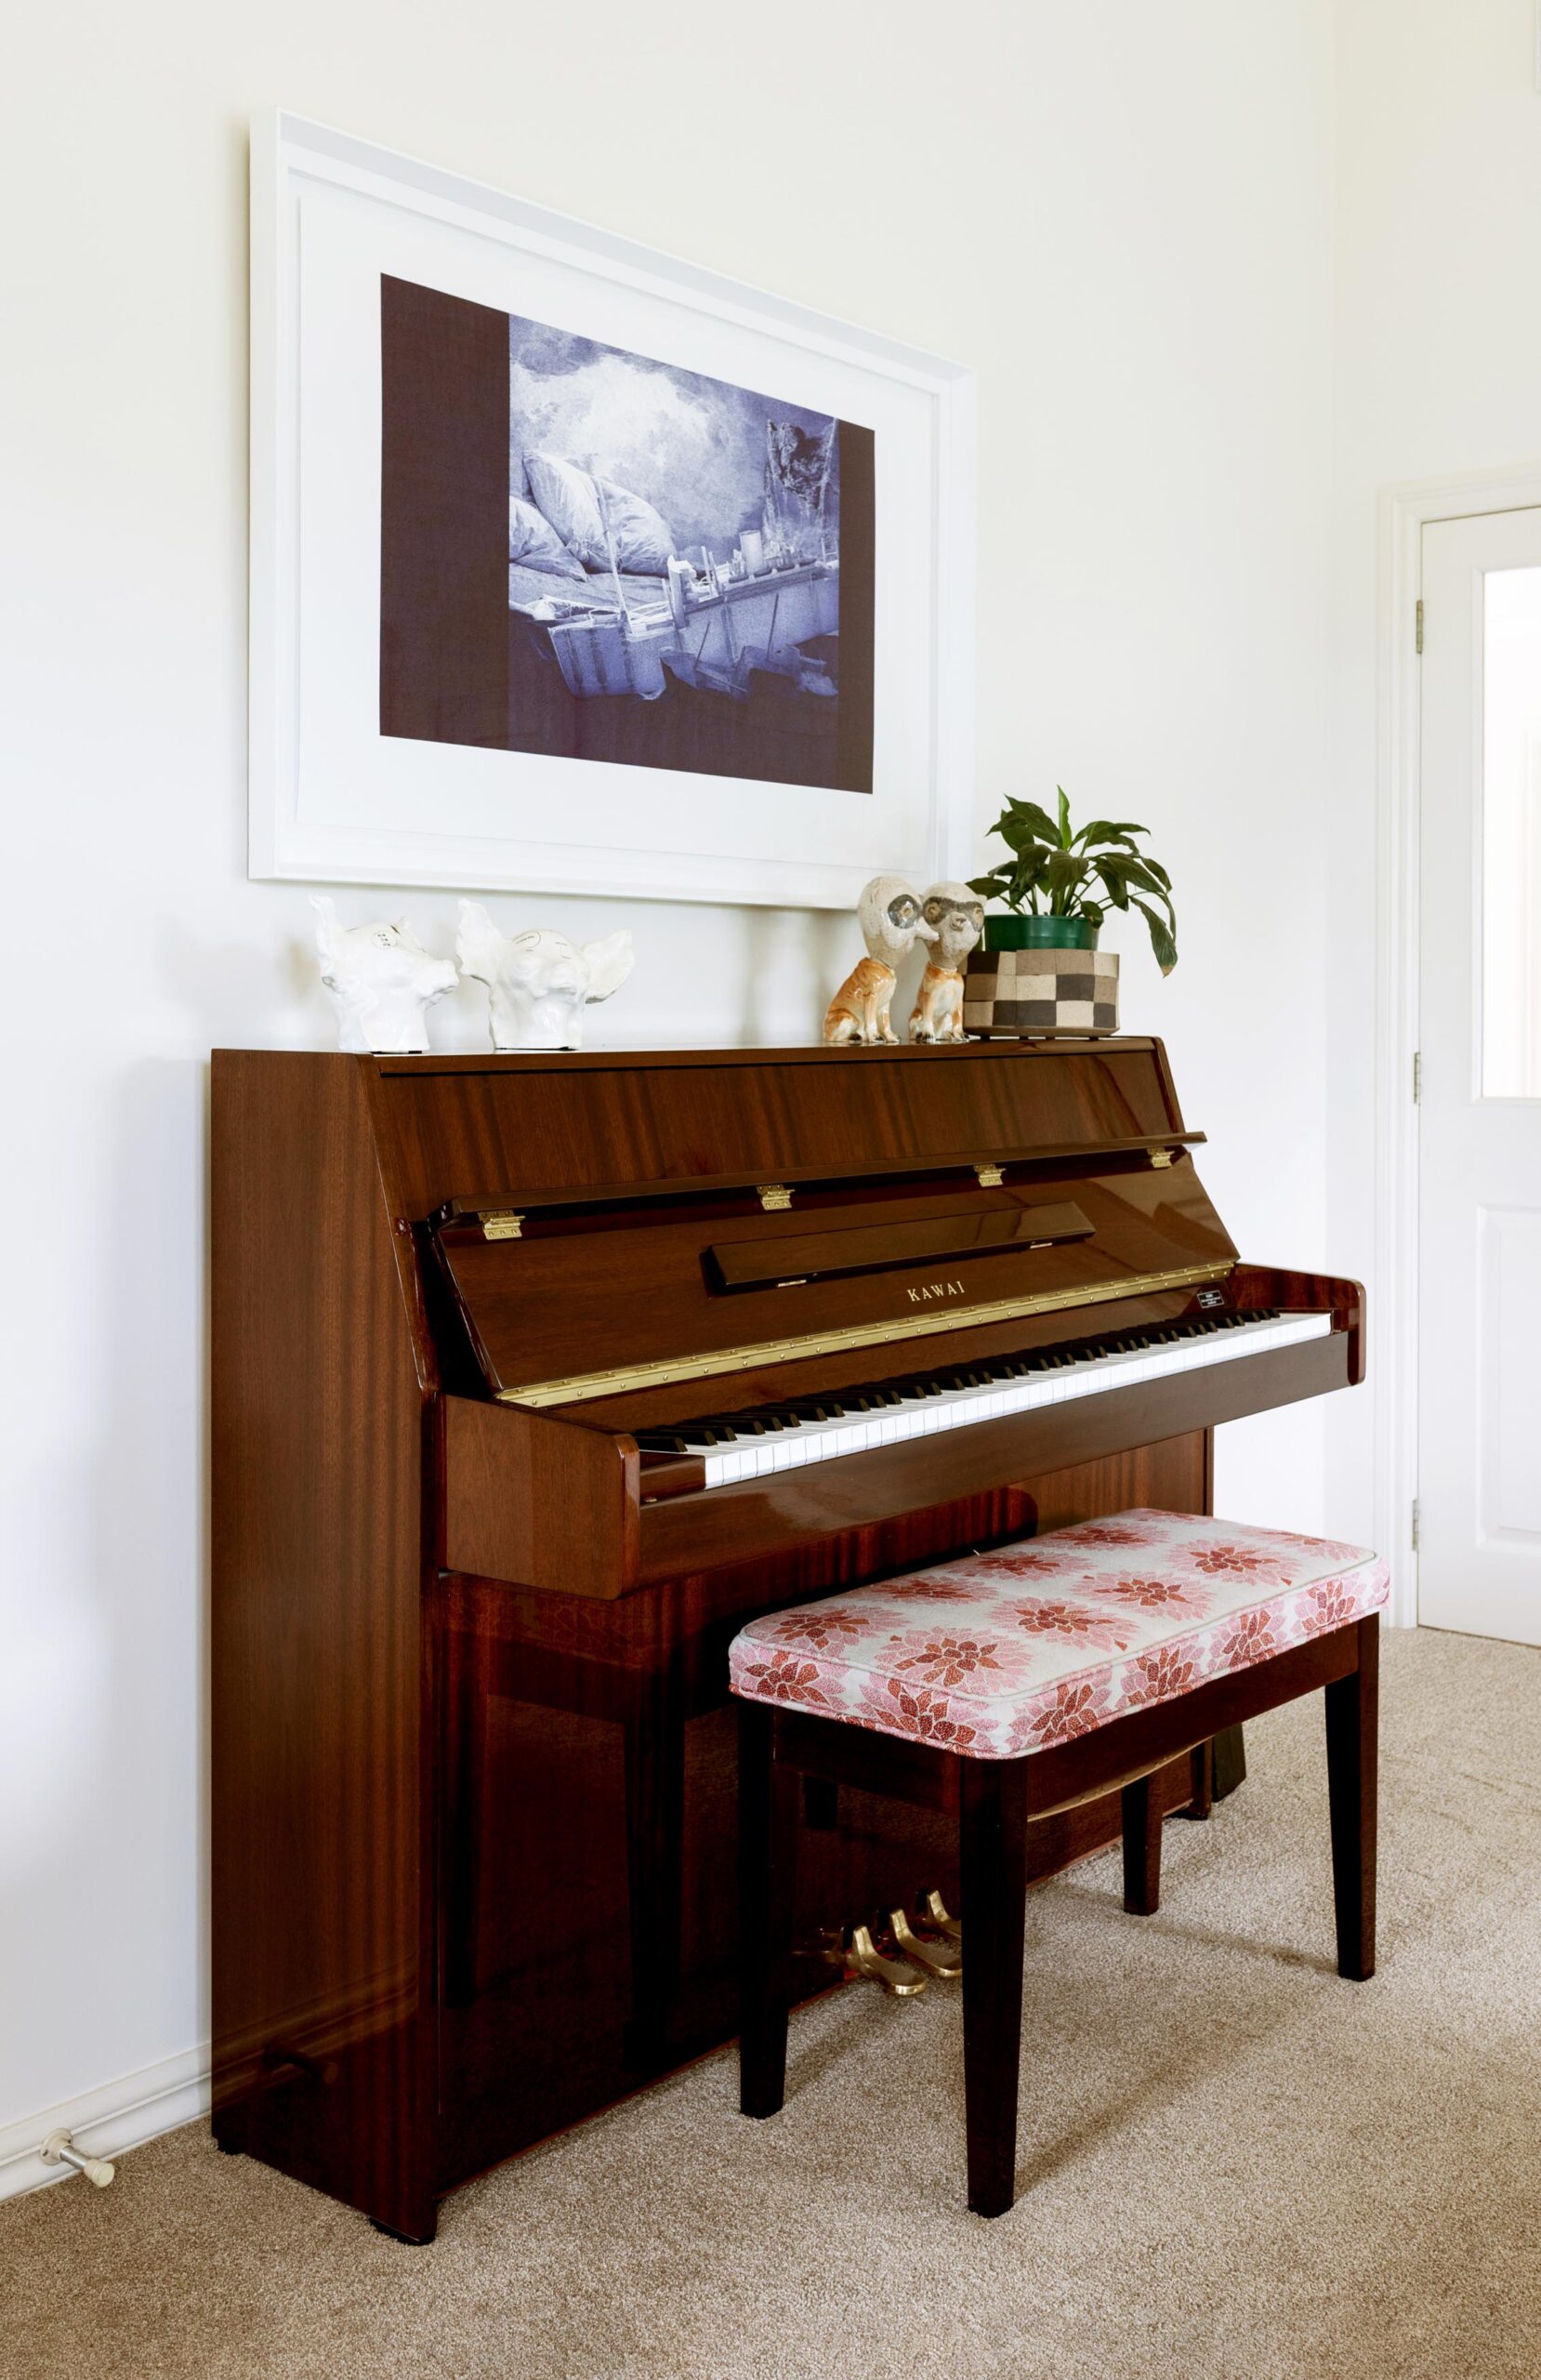 A piano with a large format art piece above it